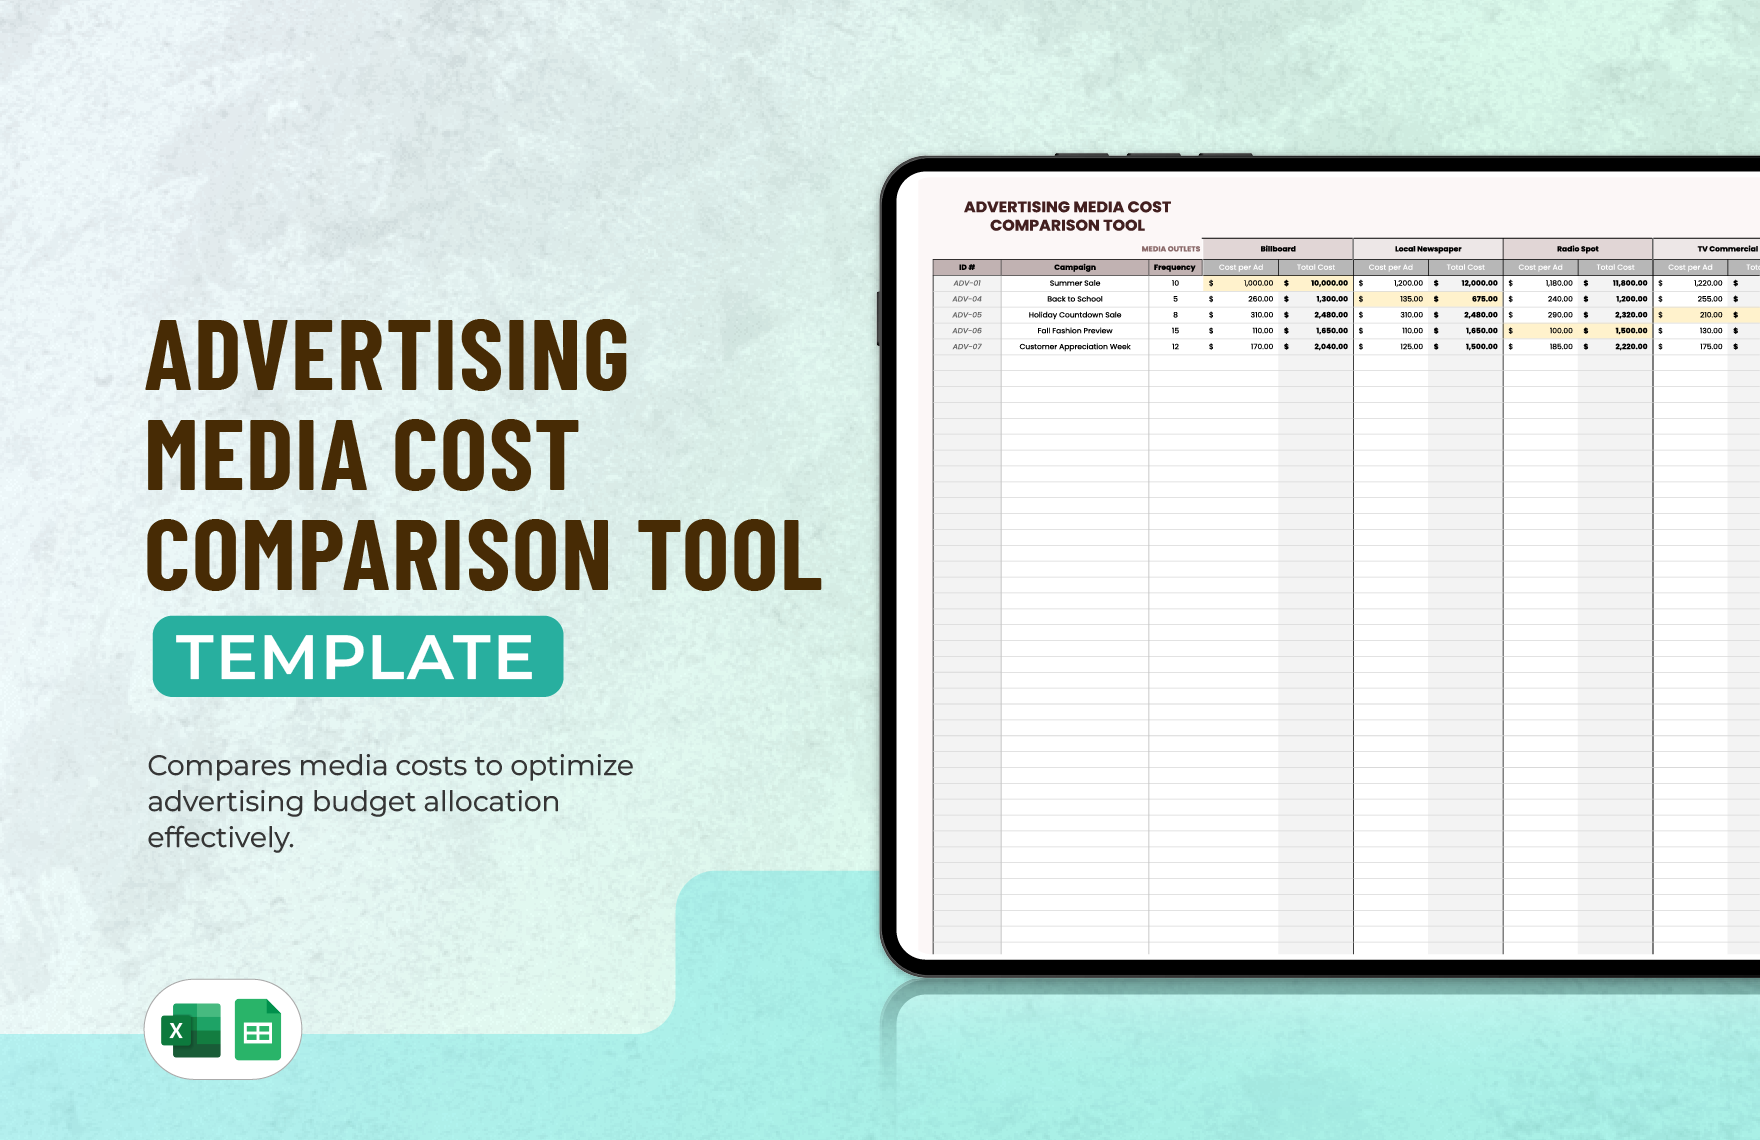 Advertising Media Cost Comparison Tool Template in Excel, Google Sheets